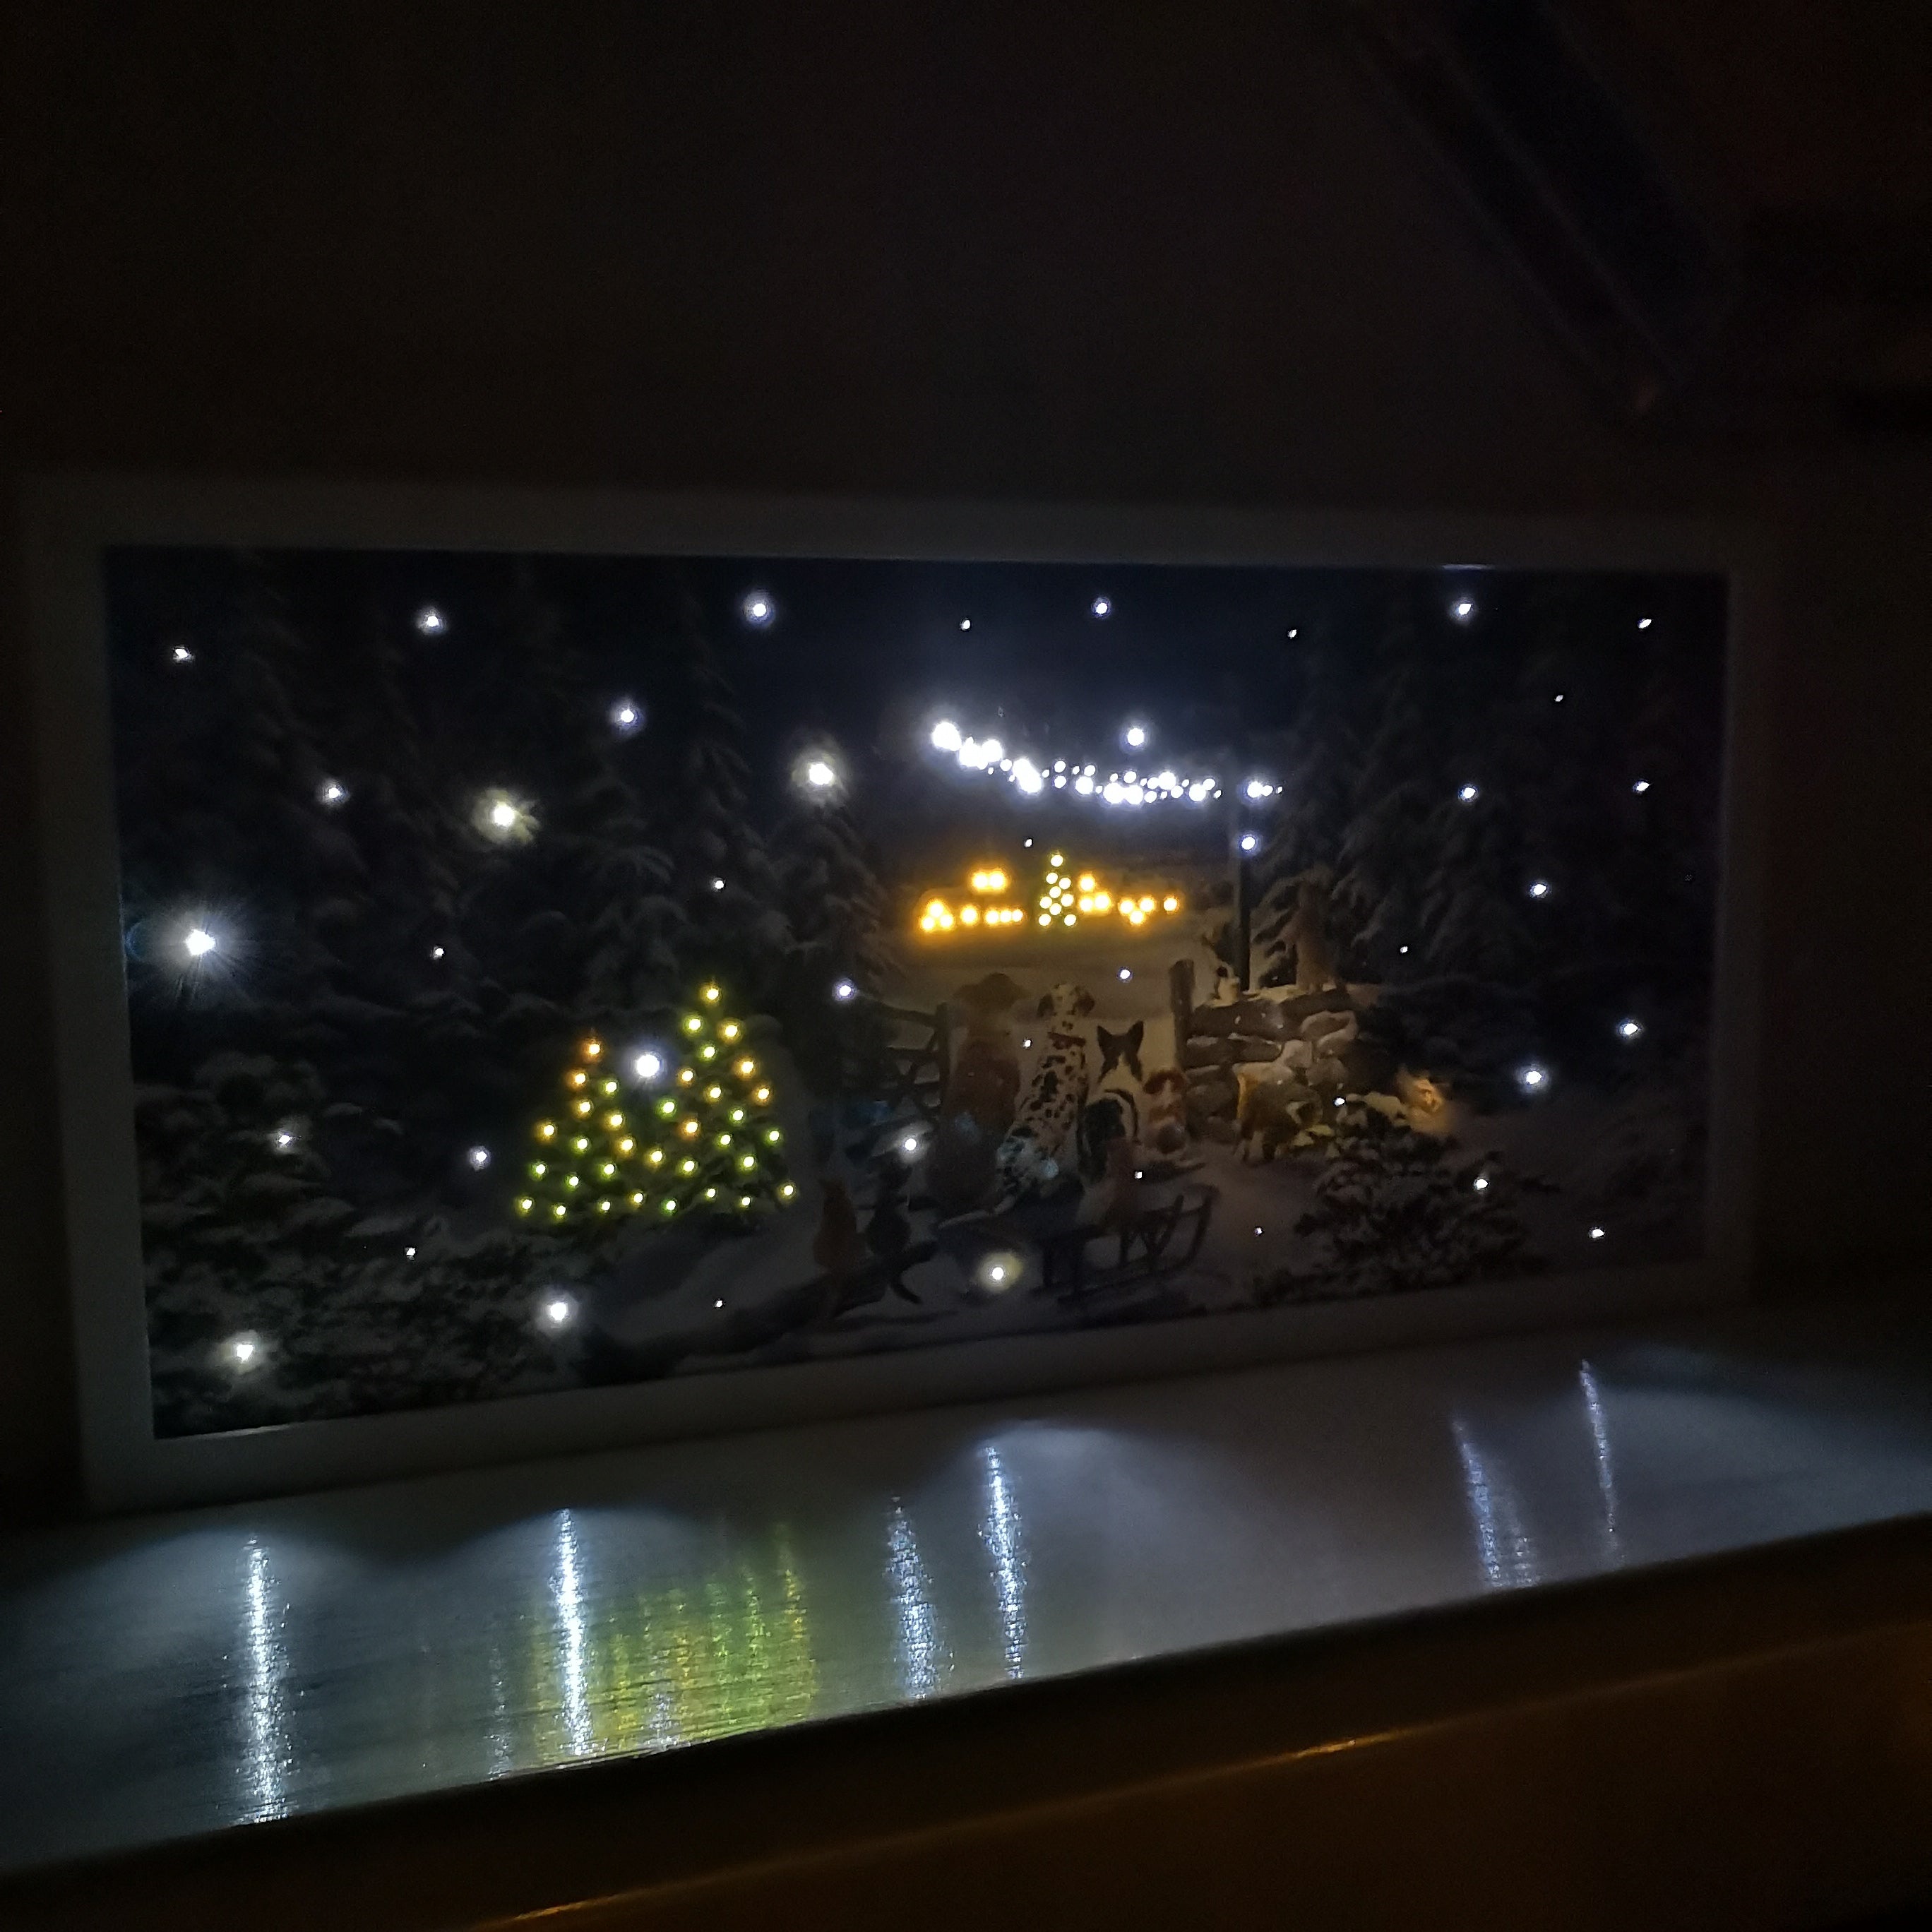 H30 x 60cm Battery Operated Fibre Optic Winter Dogs Watching Santa Sleigh Scene Touch Activated Christmas Canvas